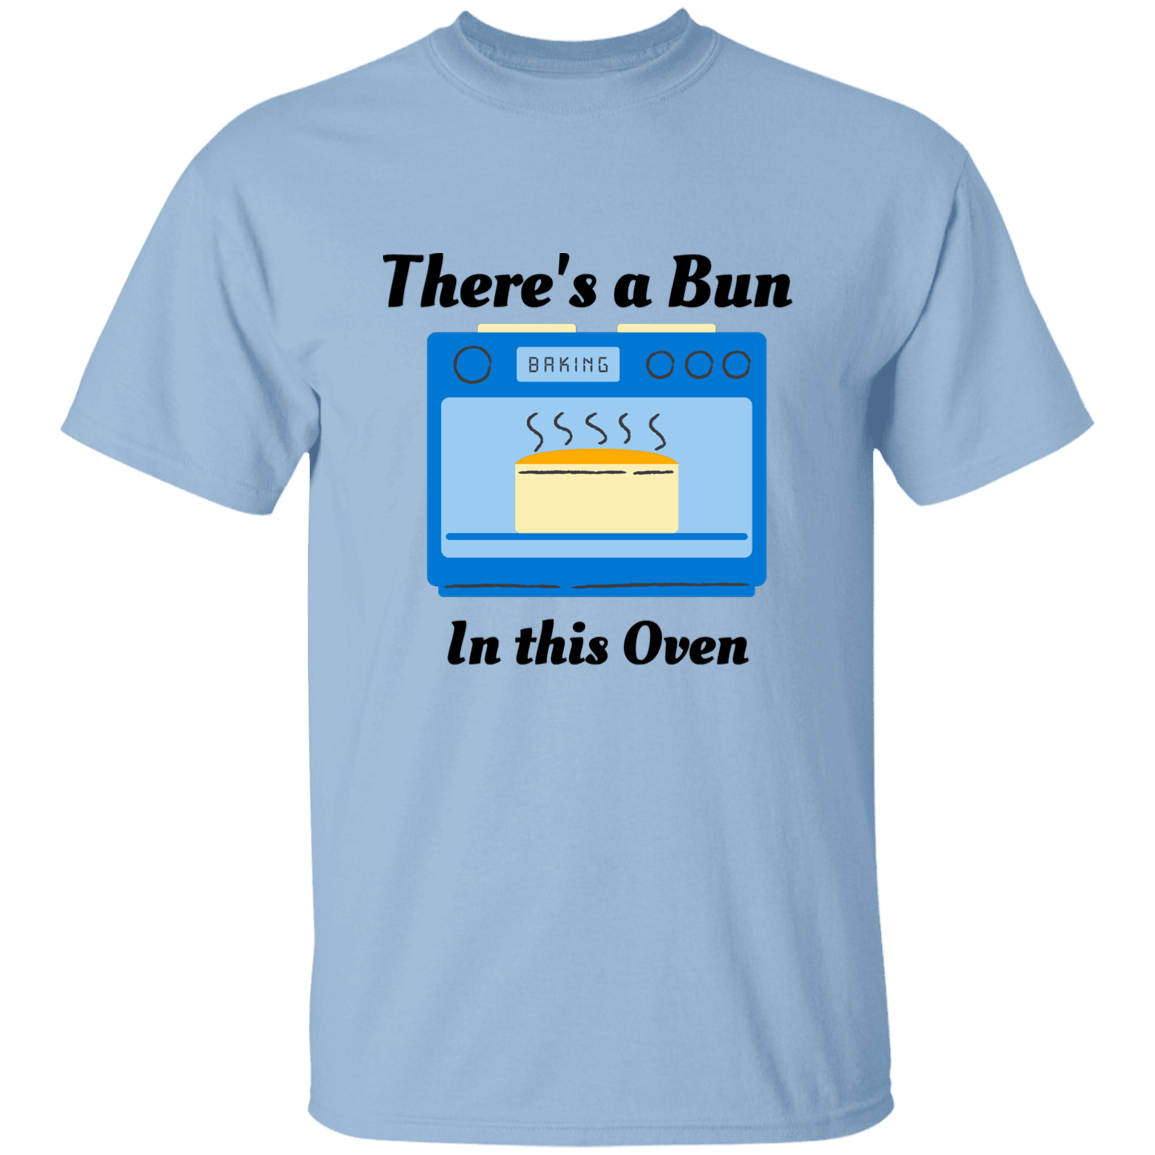 There's a Bun... T-Shirt